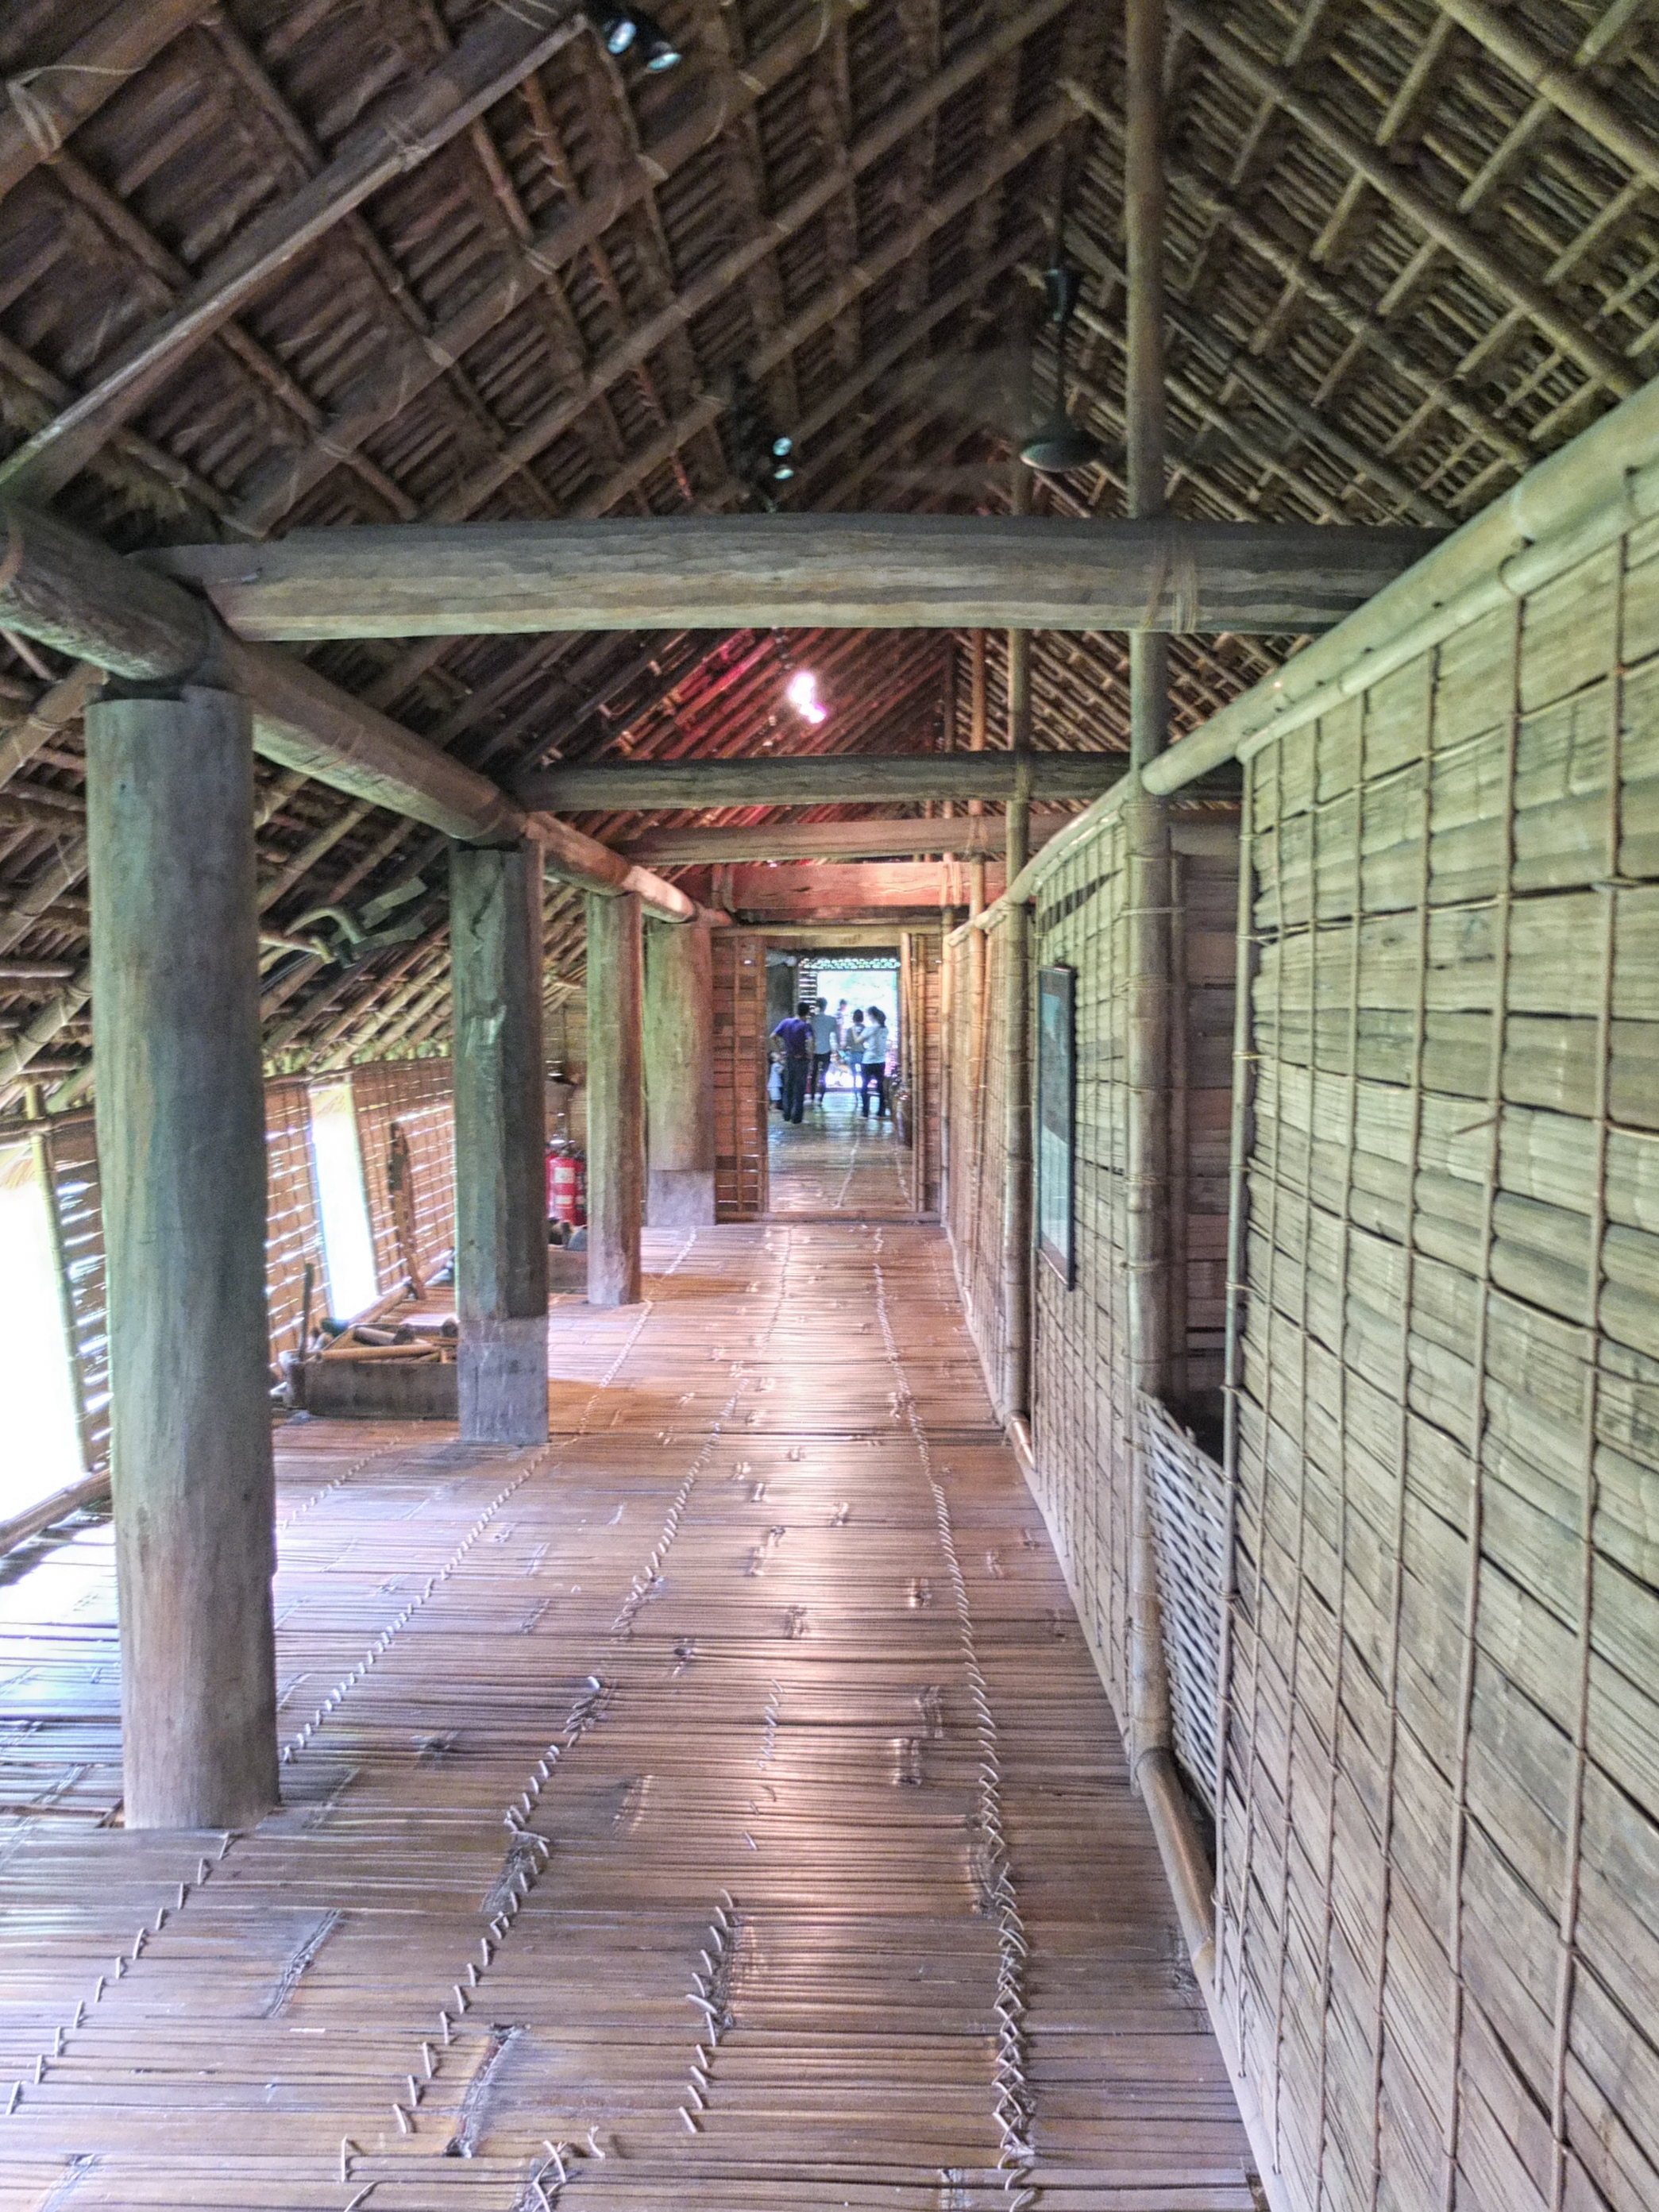 a long wooden hallway with people walking in the background